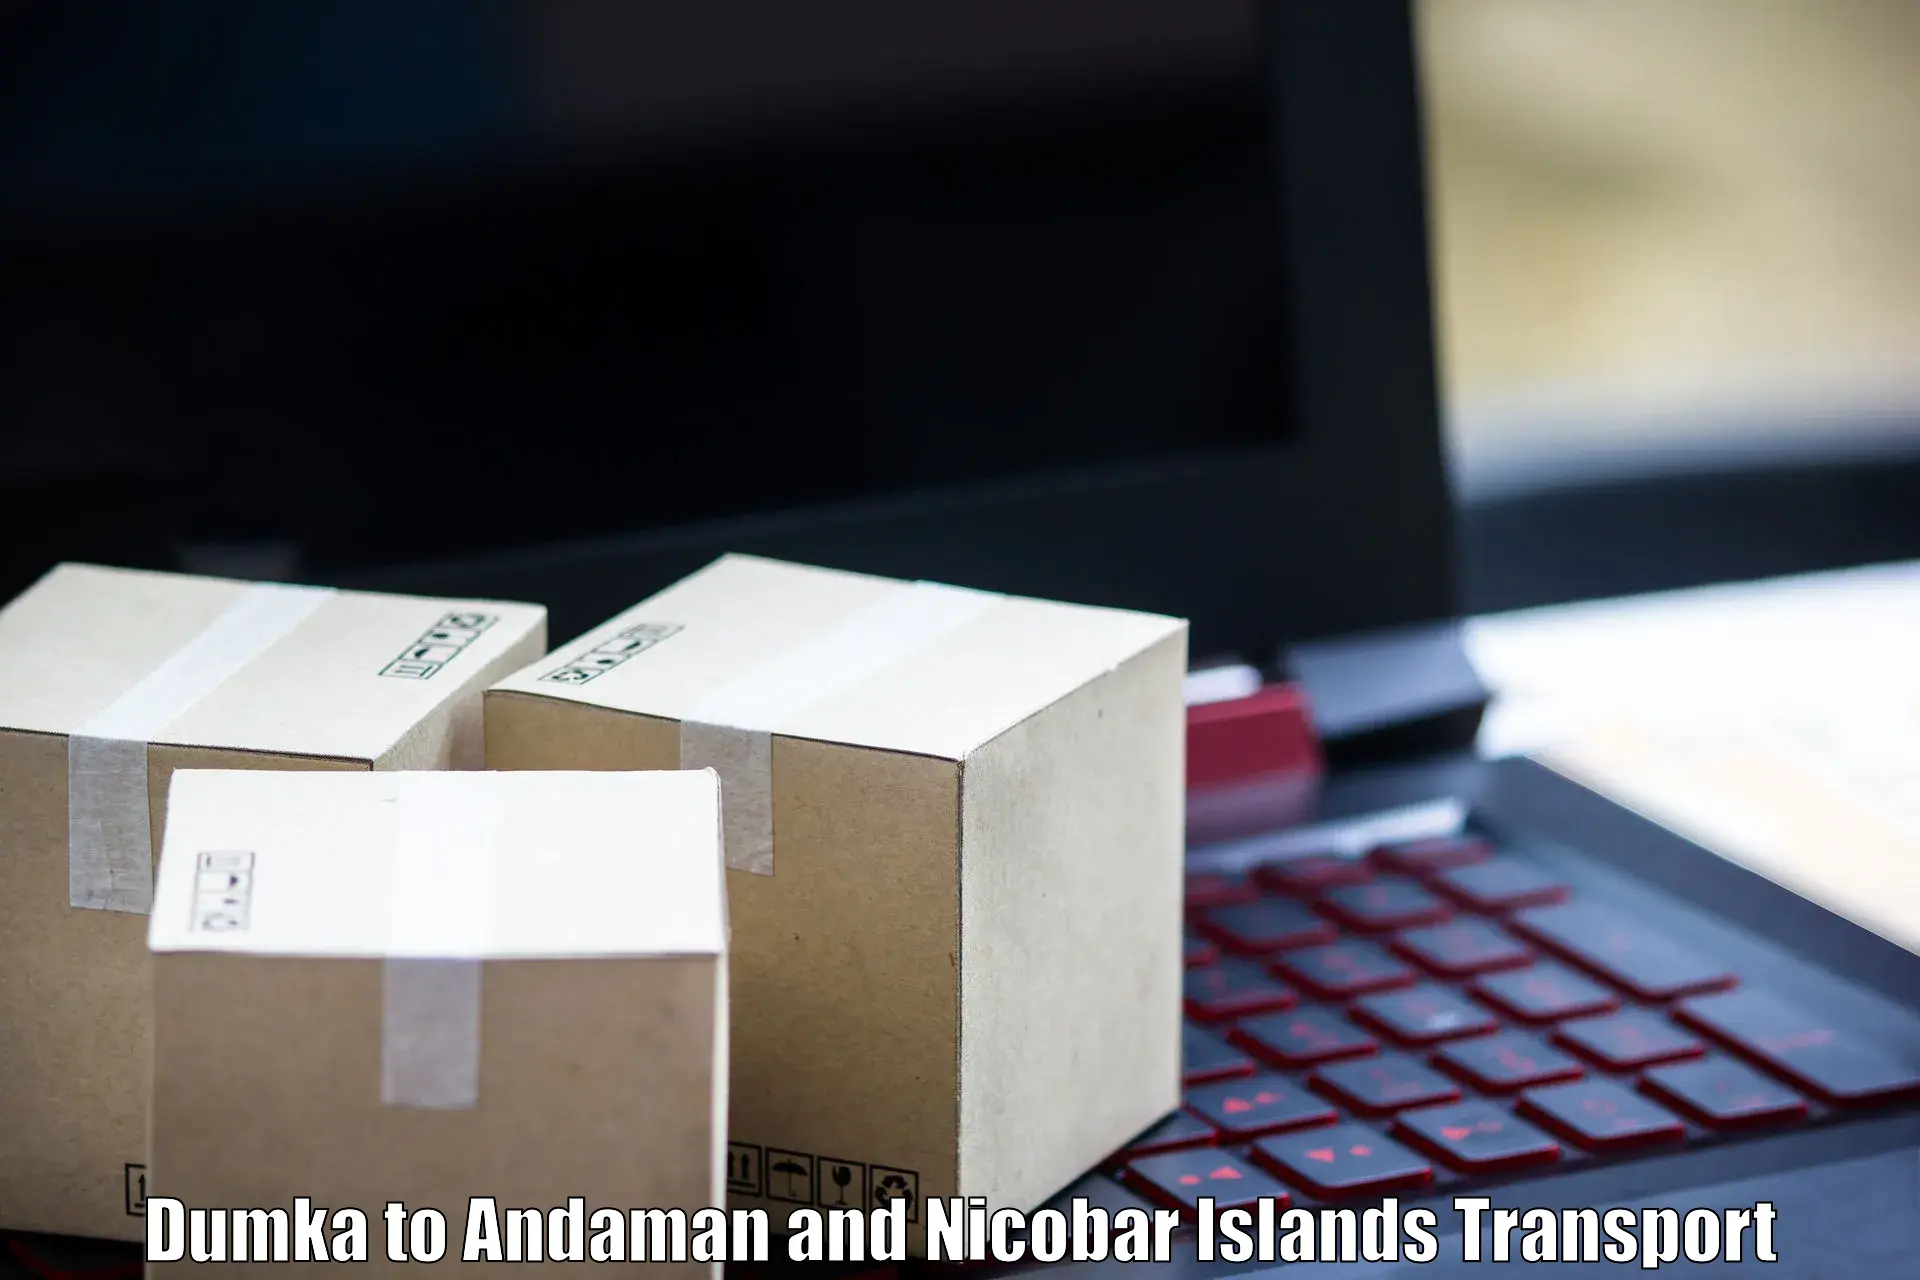 Commercial transport service Dumka to Andaman and Nicobar Islands